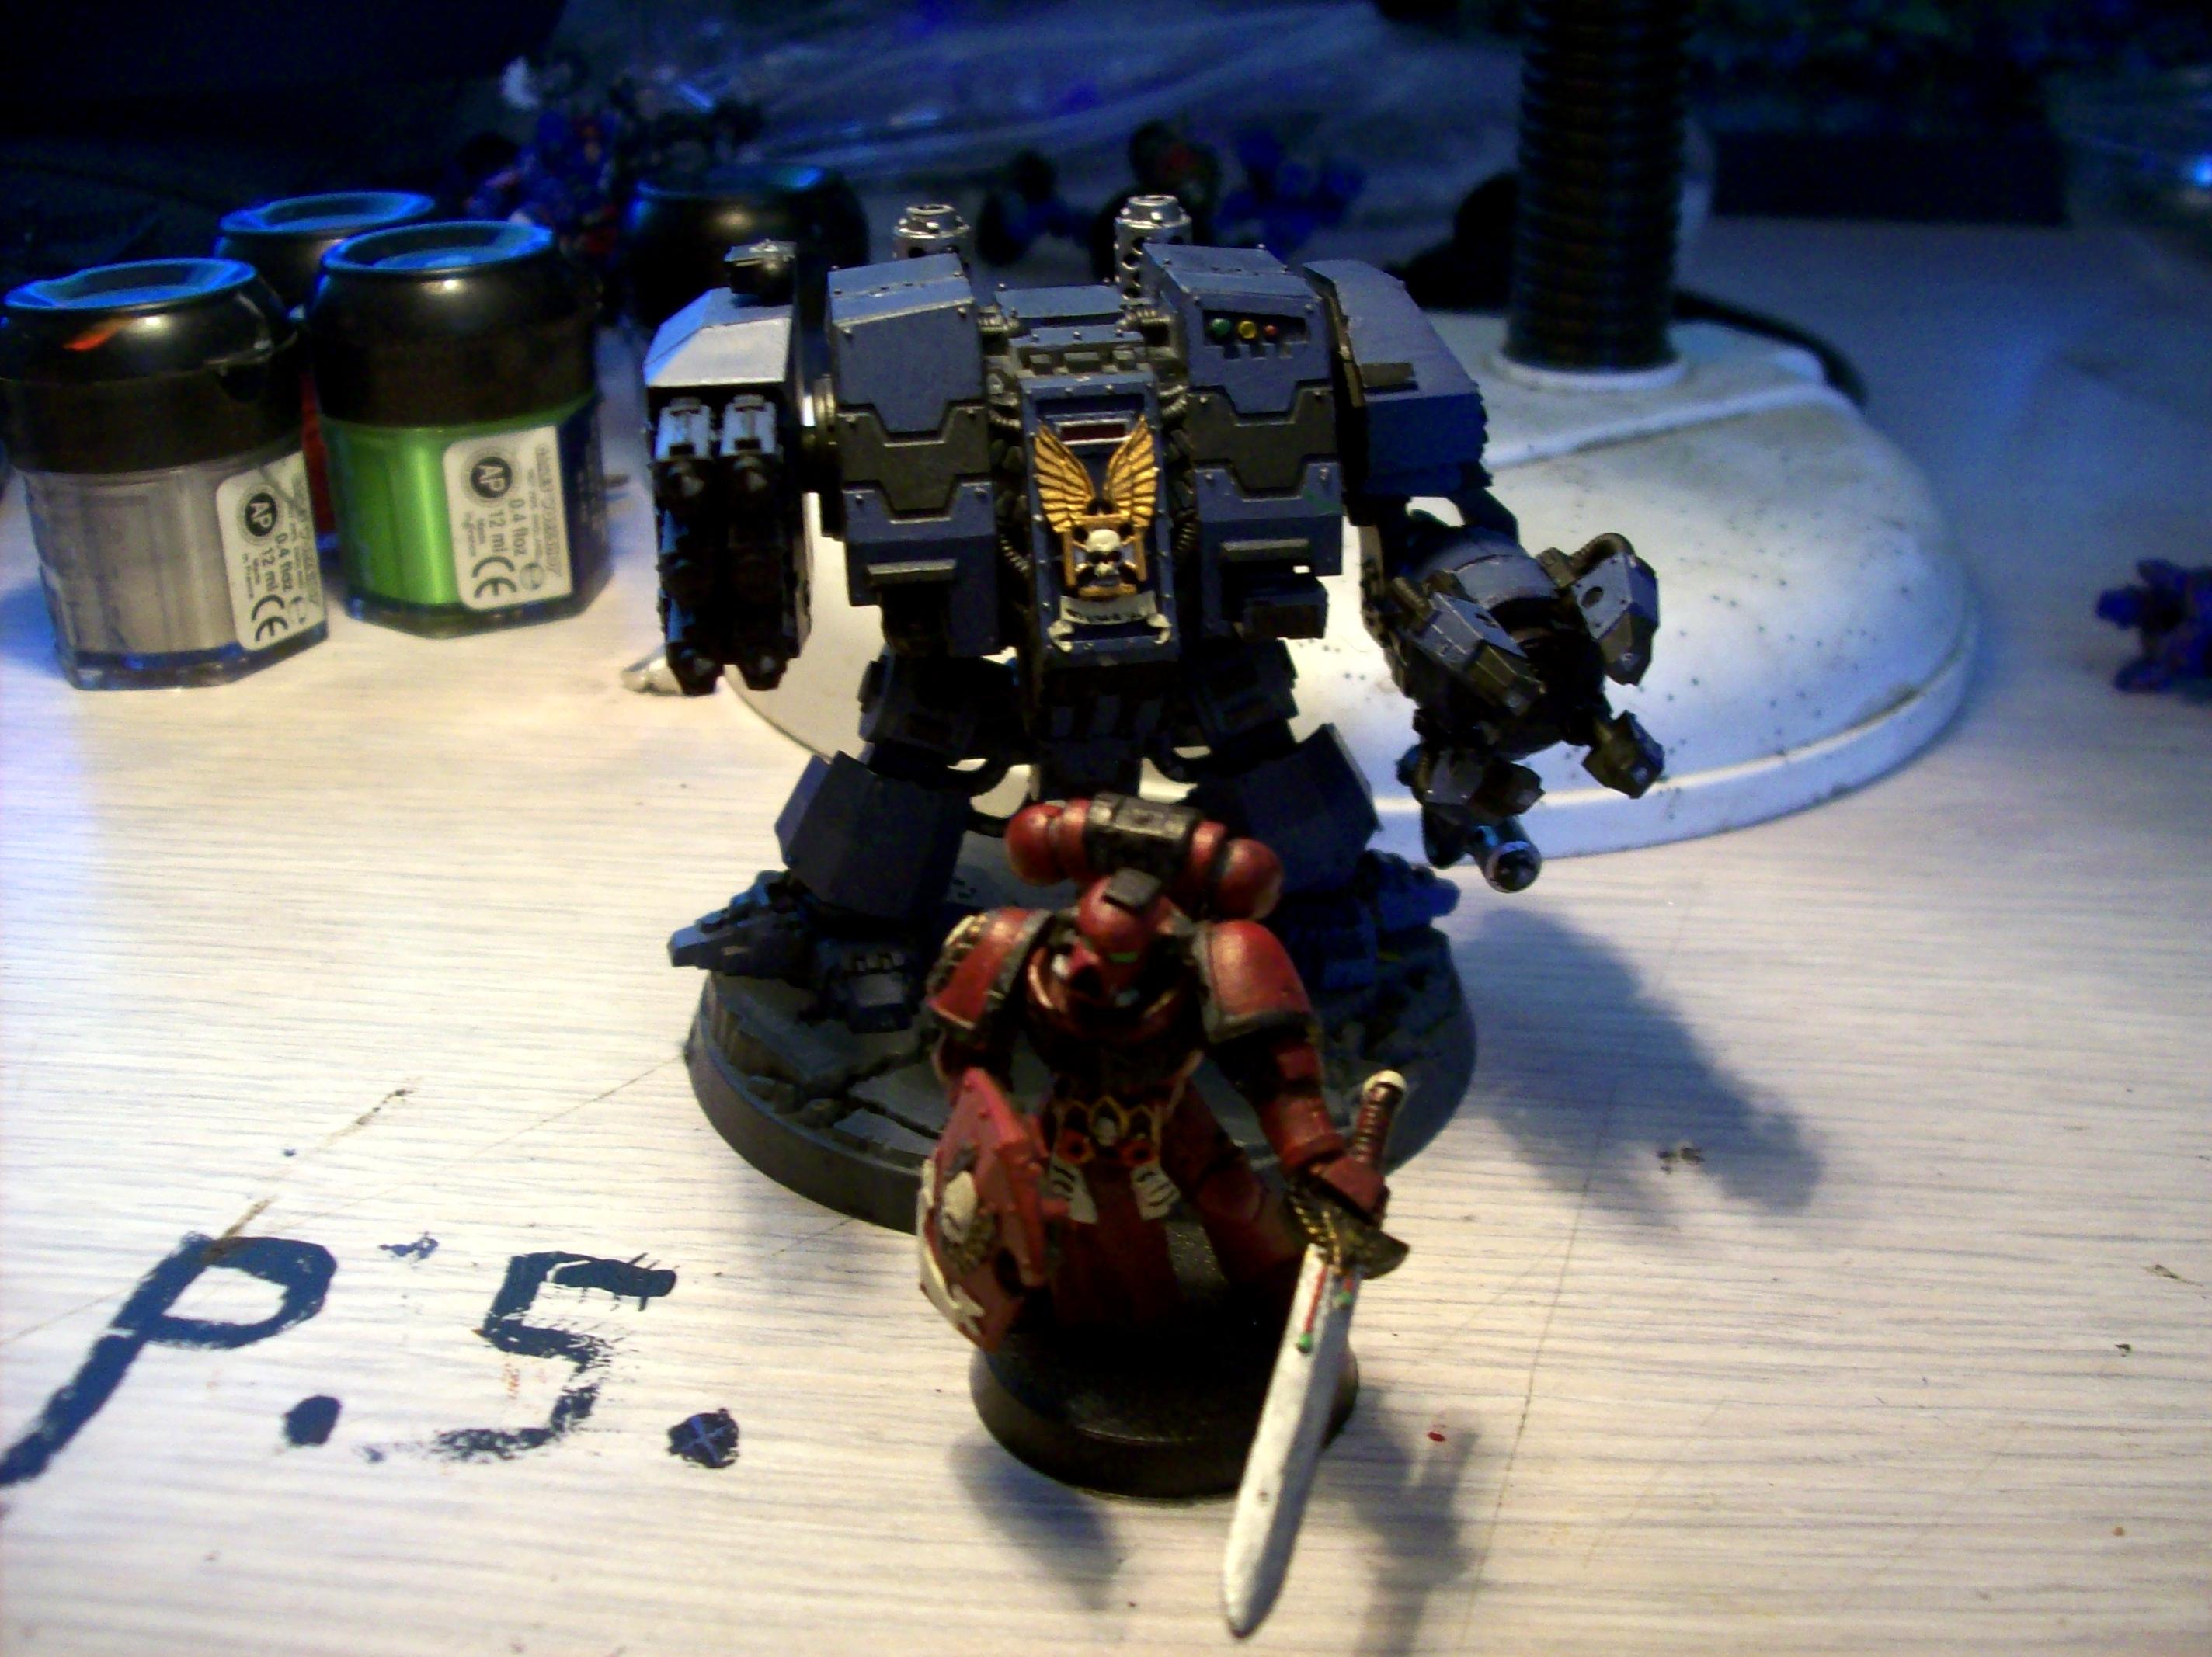 Dreadnought, Space, Space Marines, Warhammer 40,000